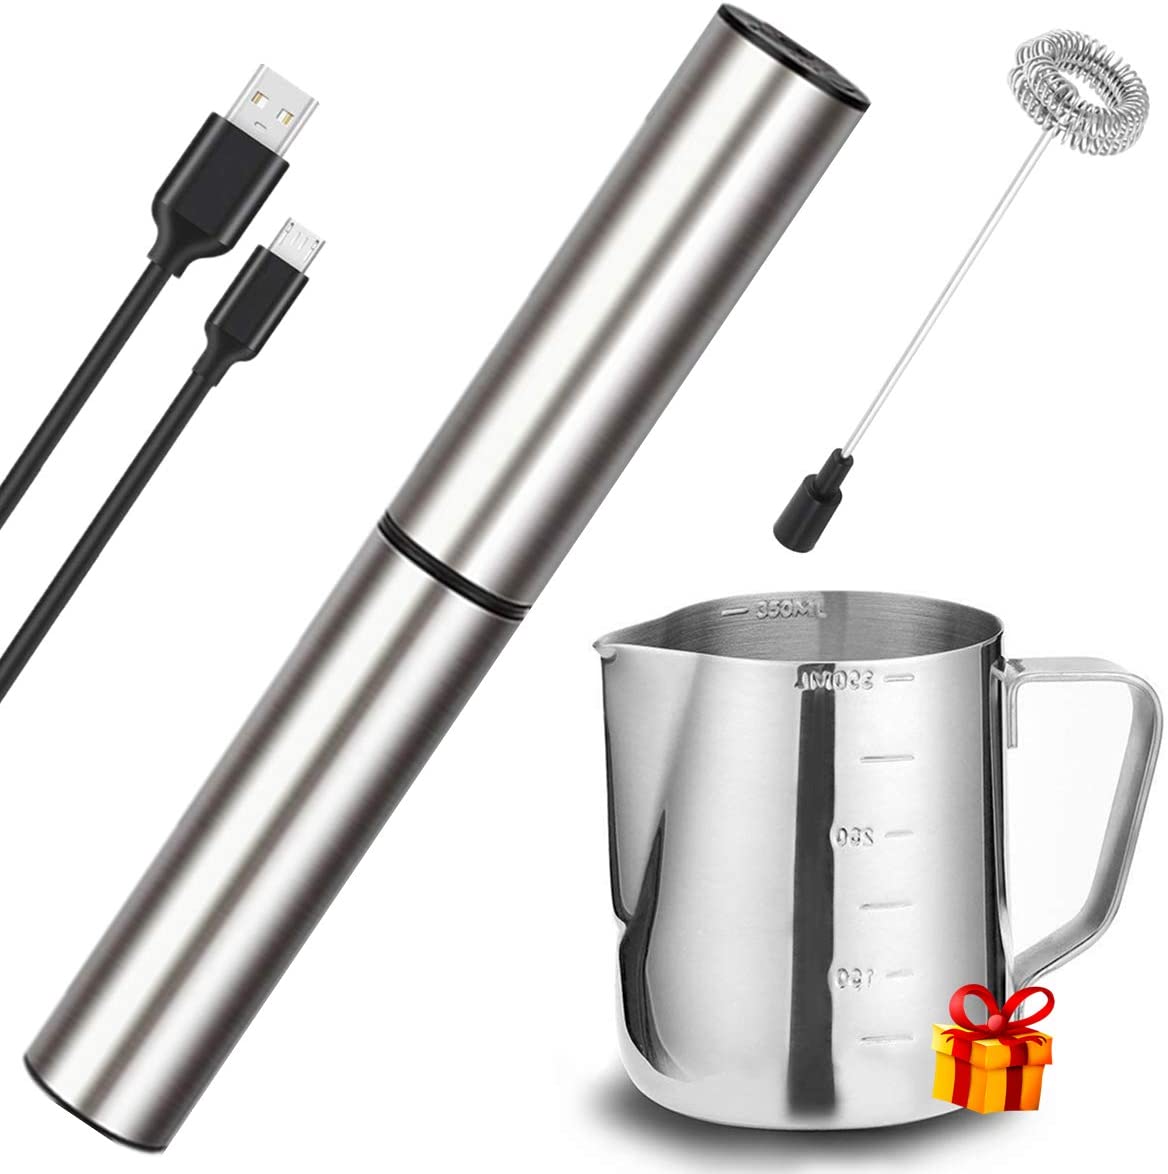 Basecent High Speed Rechargeable Milk Frother